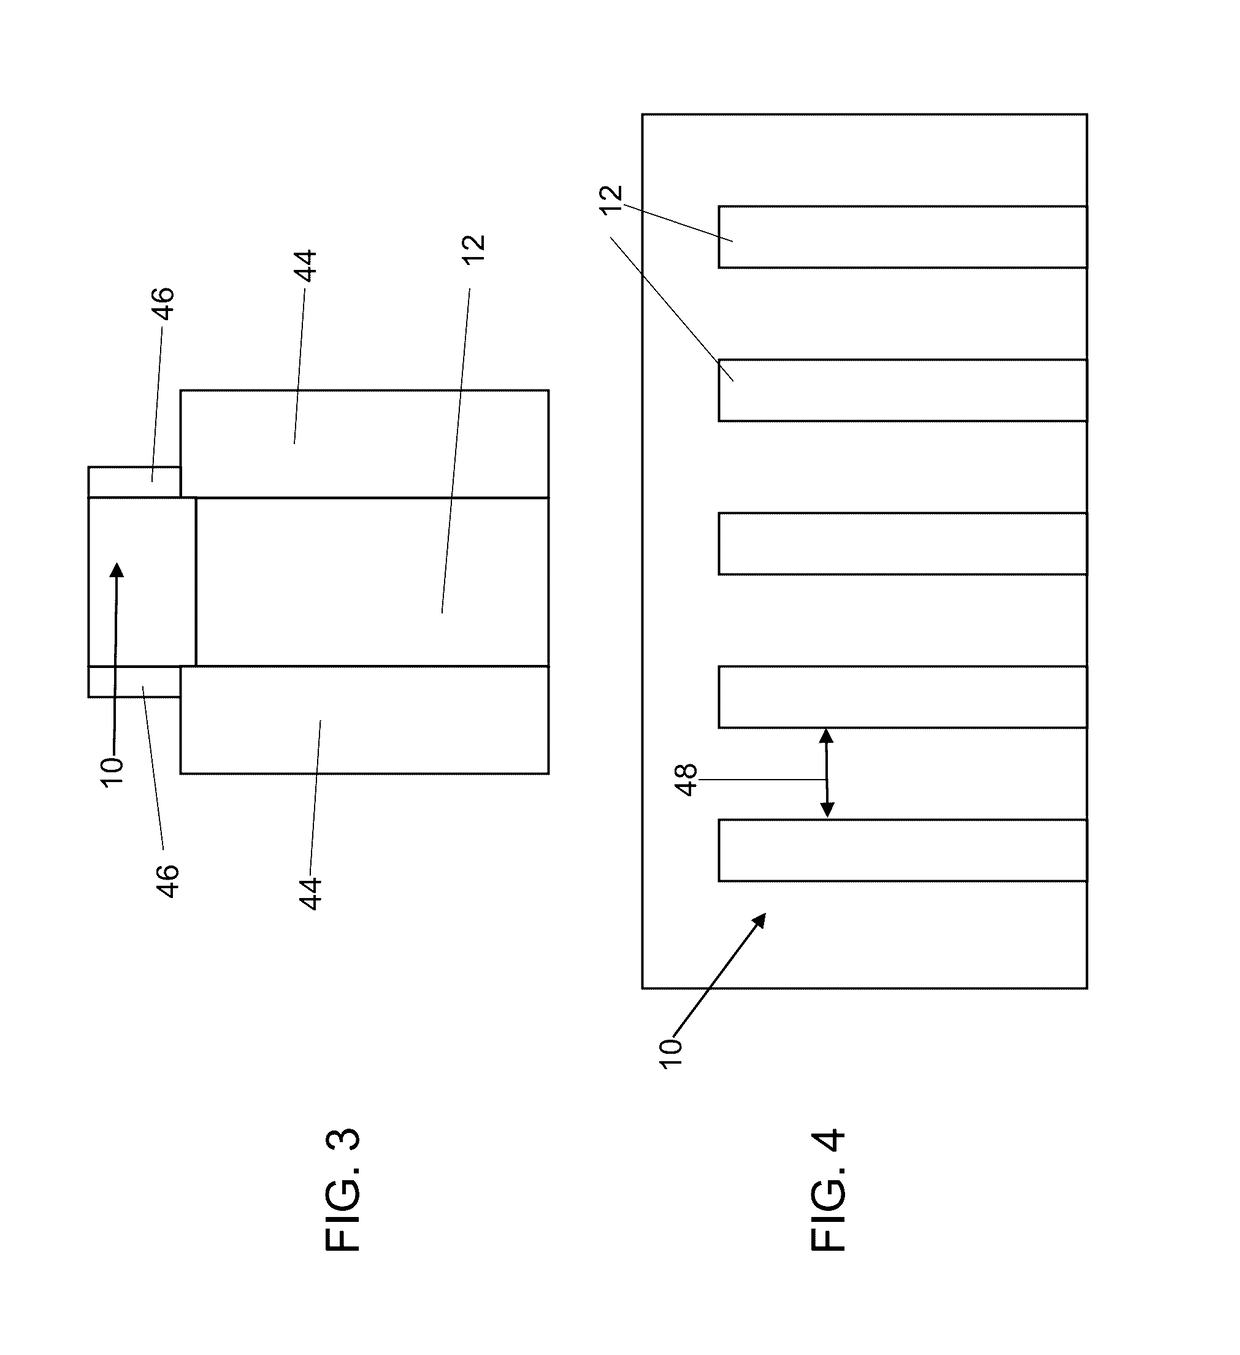 Stable work function for narrow-pitch devices